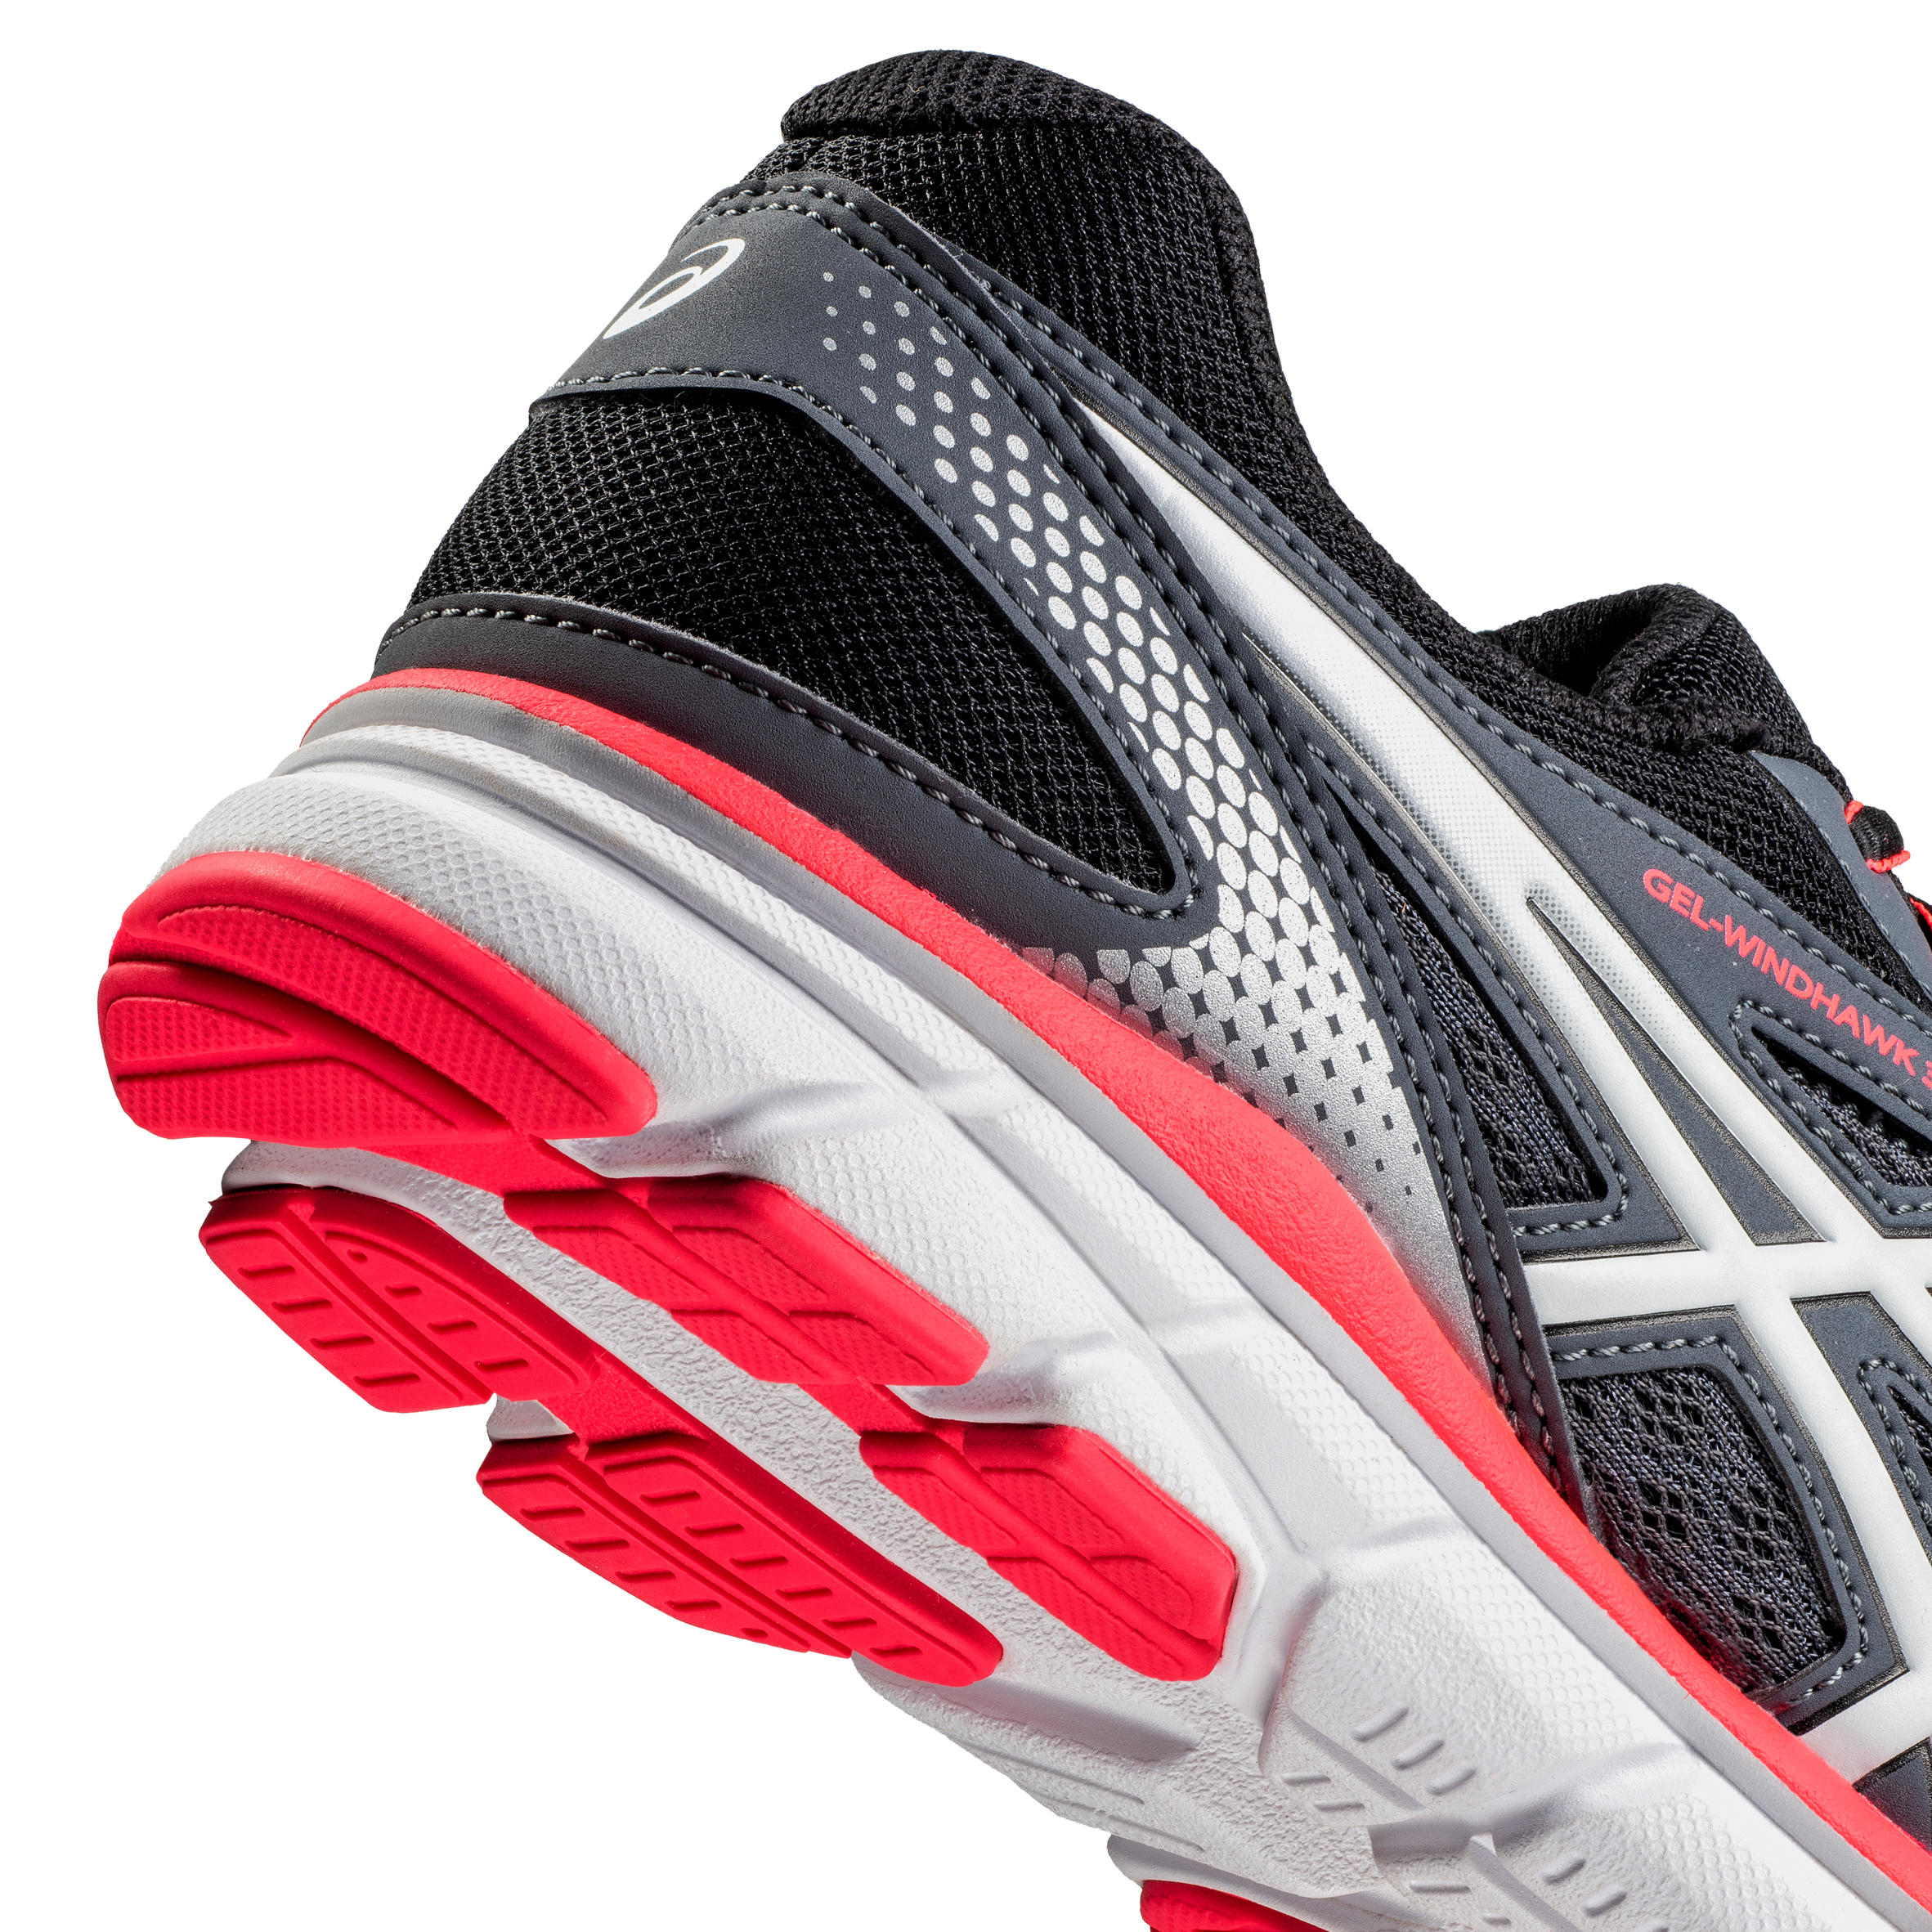 asics windhawk 2 review